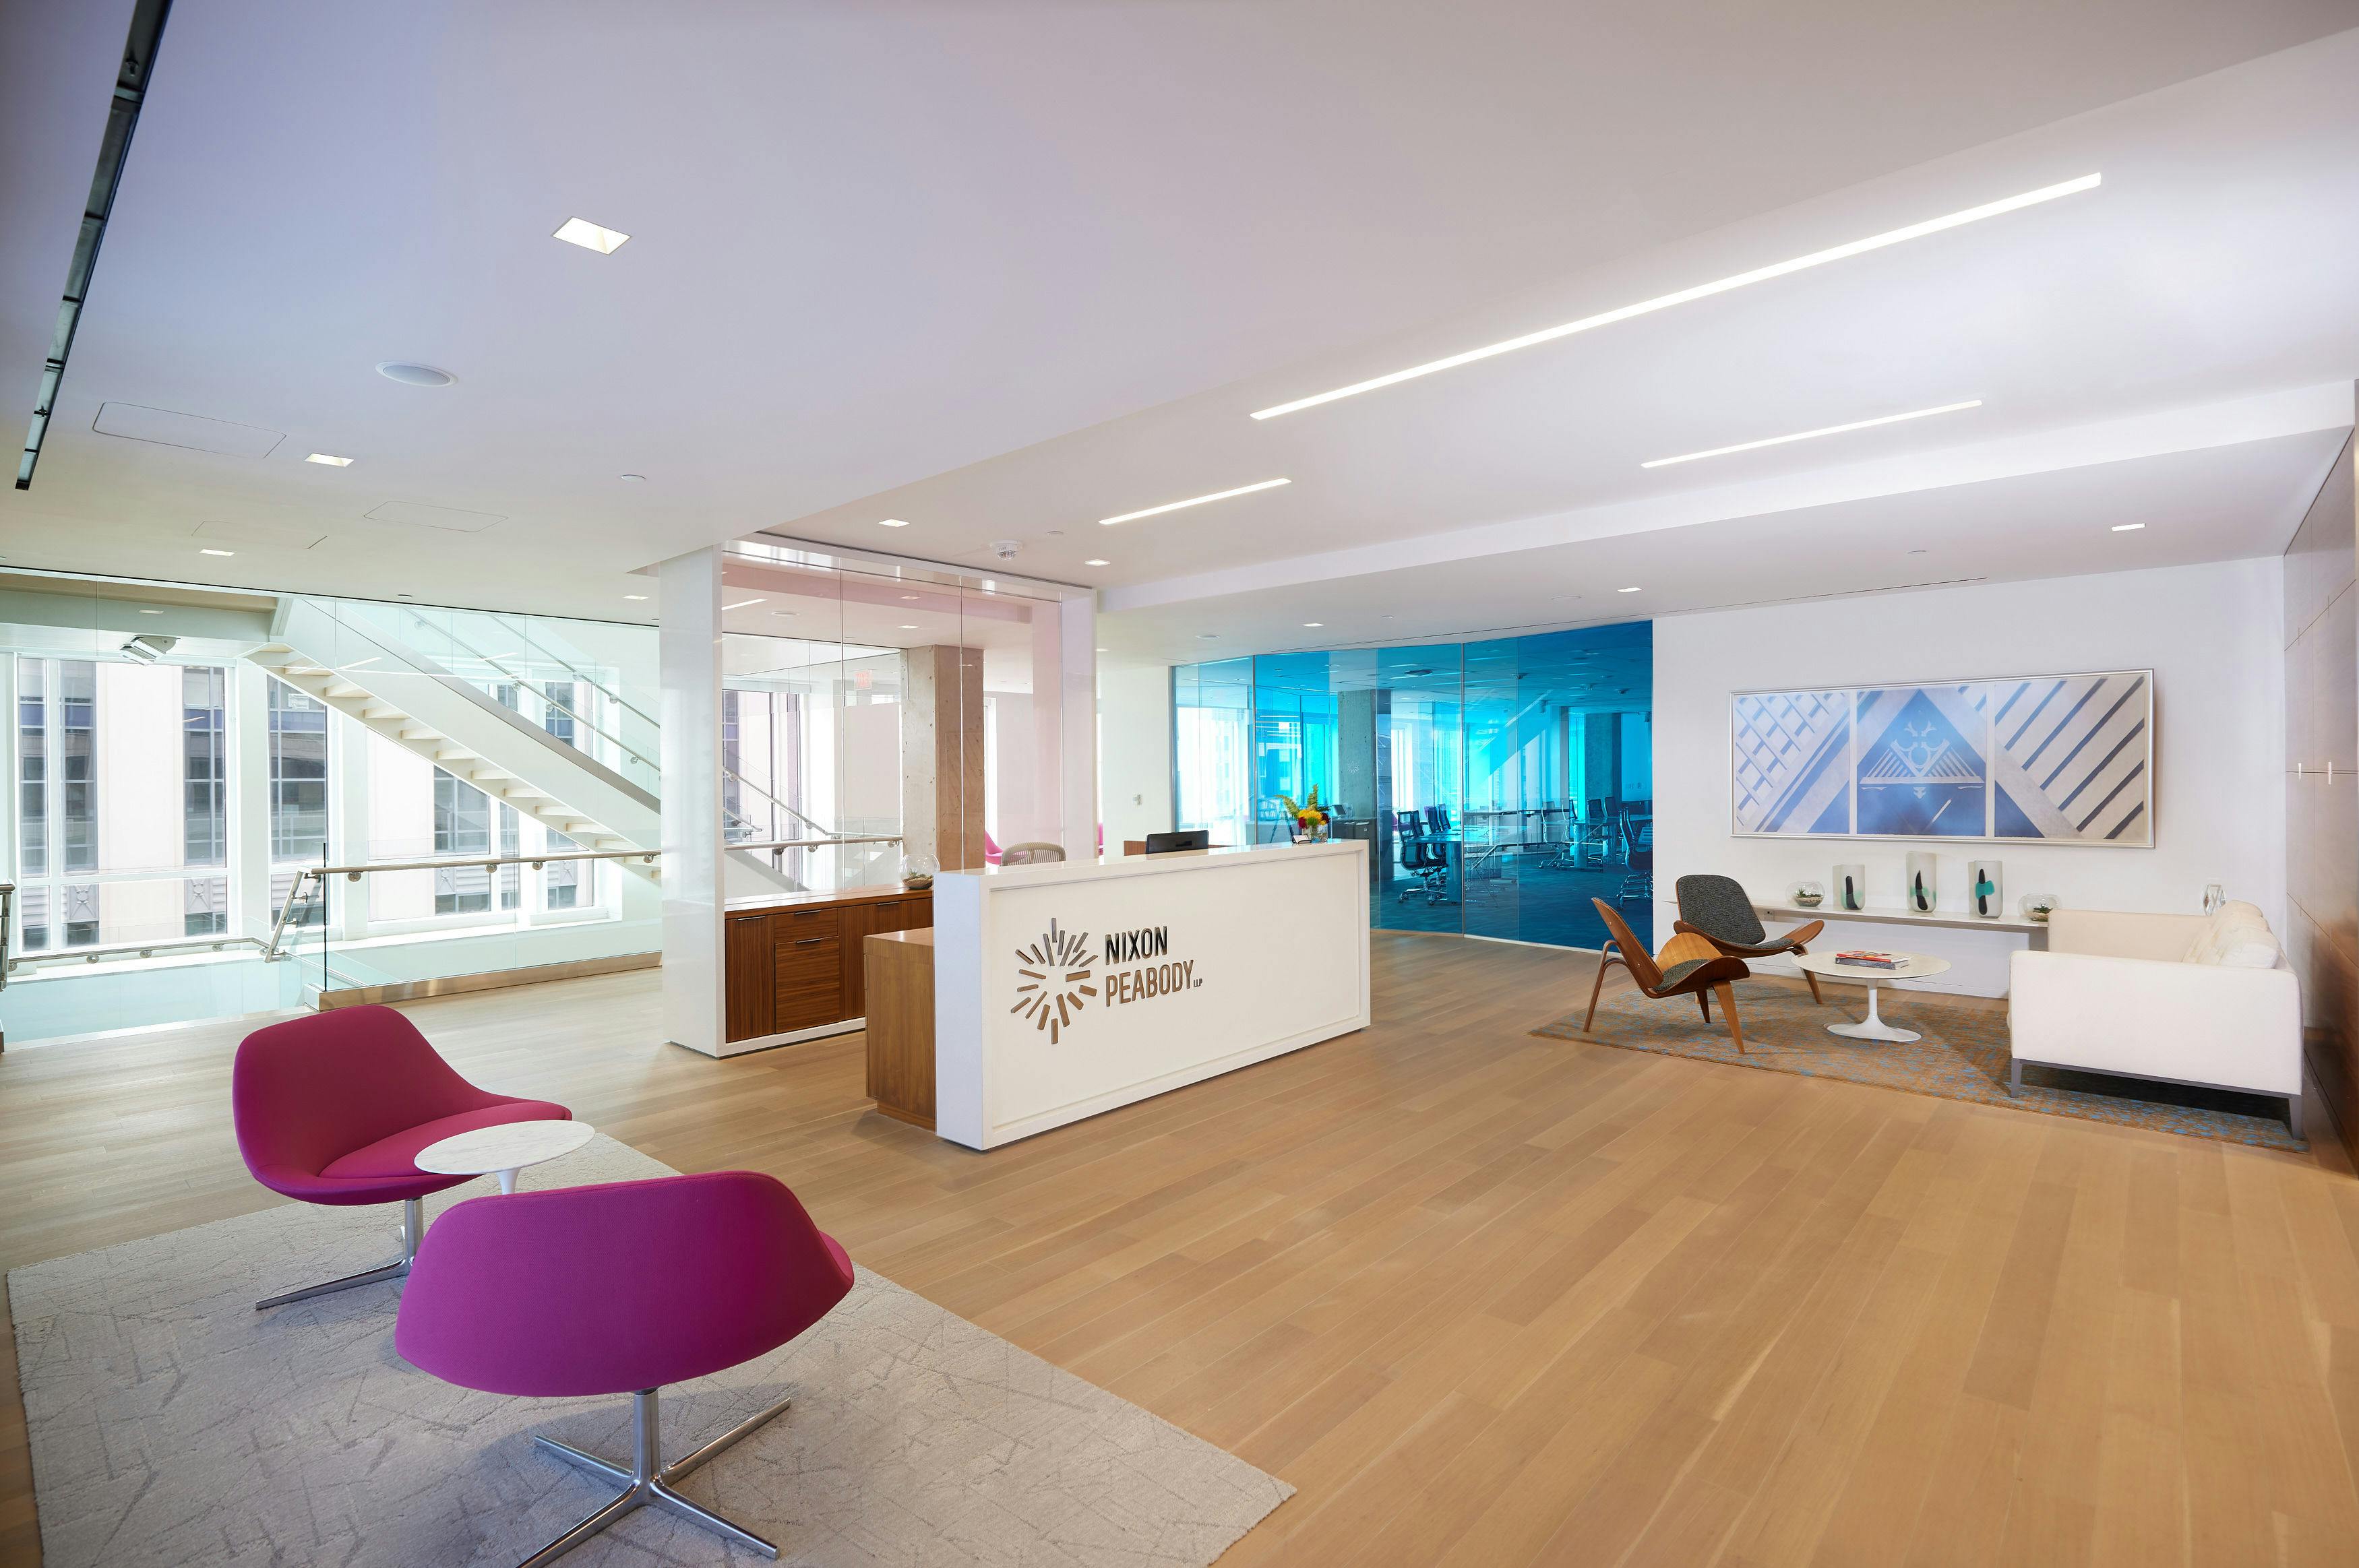 The reception area of Nixon Peabody's DC office; on the right in the foreground are two pink chairs with a small occasional table; in the middle ground is the white reception desk with the Nixon Peabody logo on the front; behind the desk is a glass-enclosed stairwell; in the background is another small seating area with a couch and two chairs, and a large conference room behind panels of blue-tinted glass